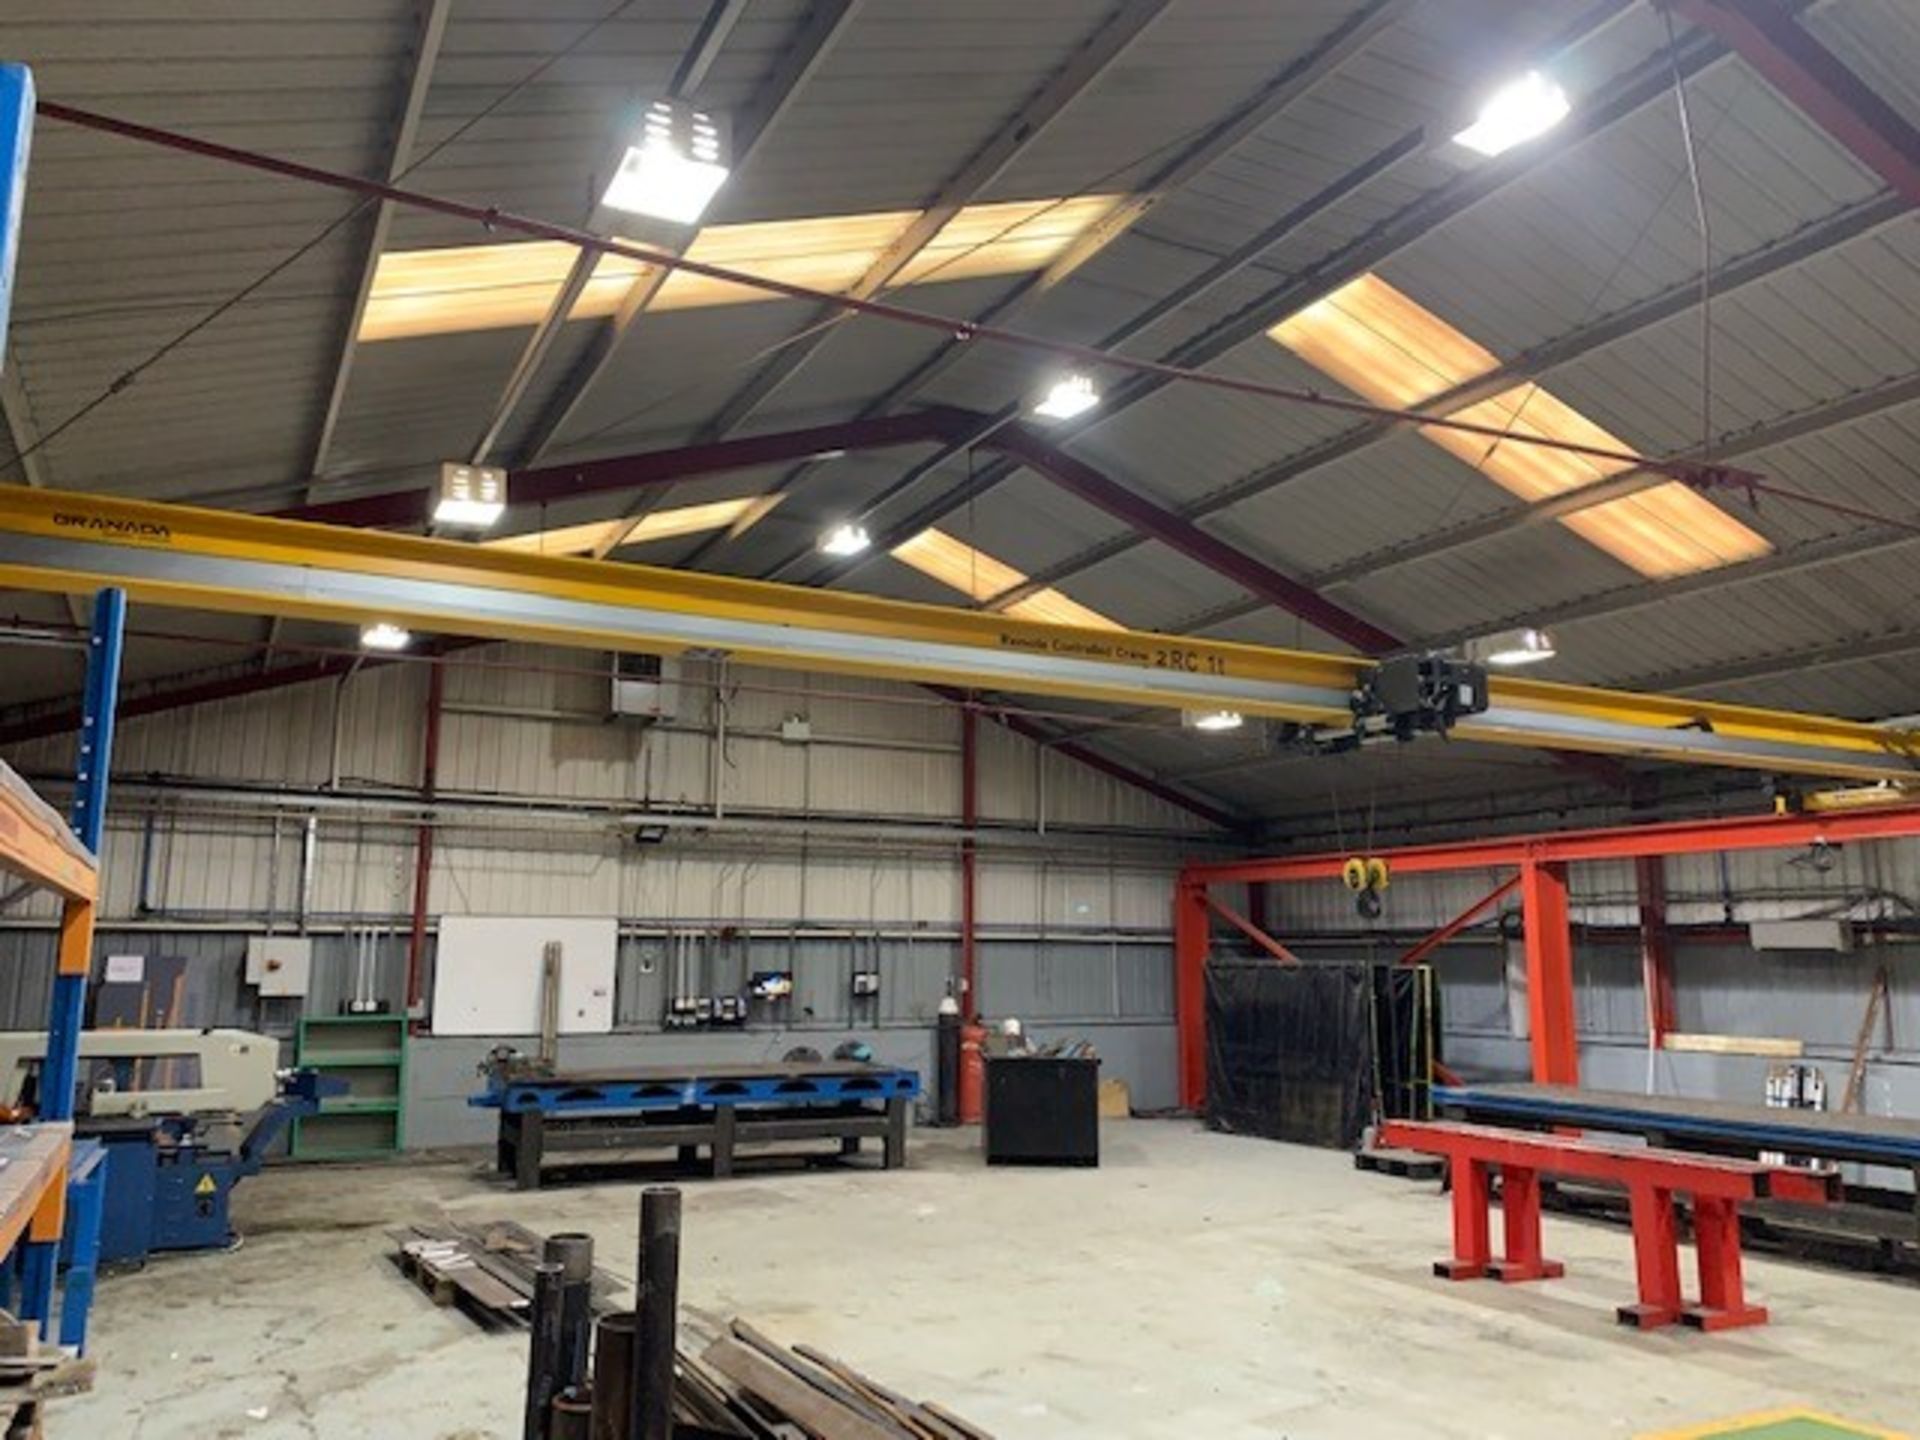 (2) Granada Model RC 1T 1 Tonne Remote Controlled Overhead Cranes (2017) 13m Span x 3.206m High on F - Image 12 of 18